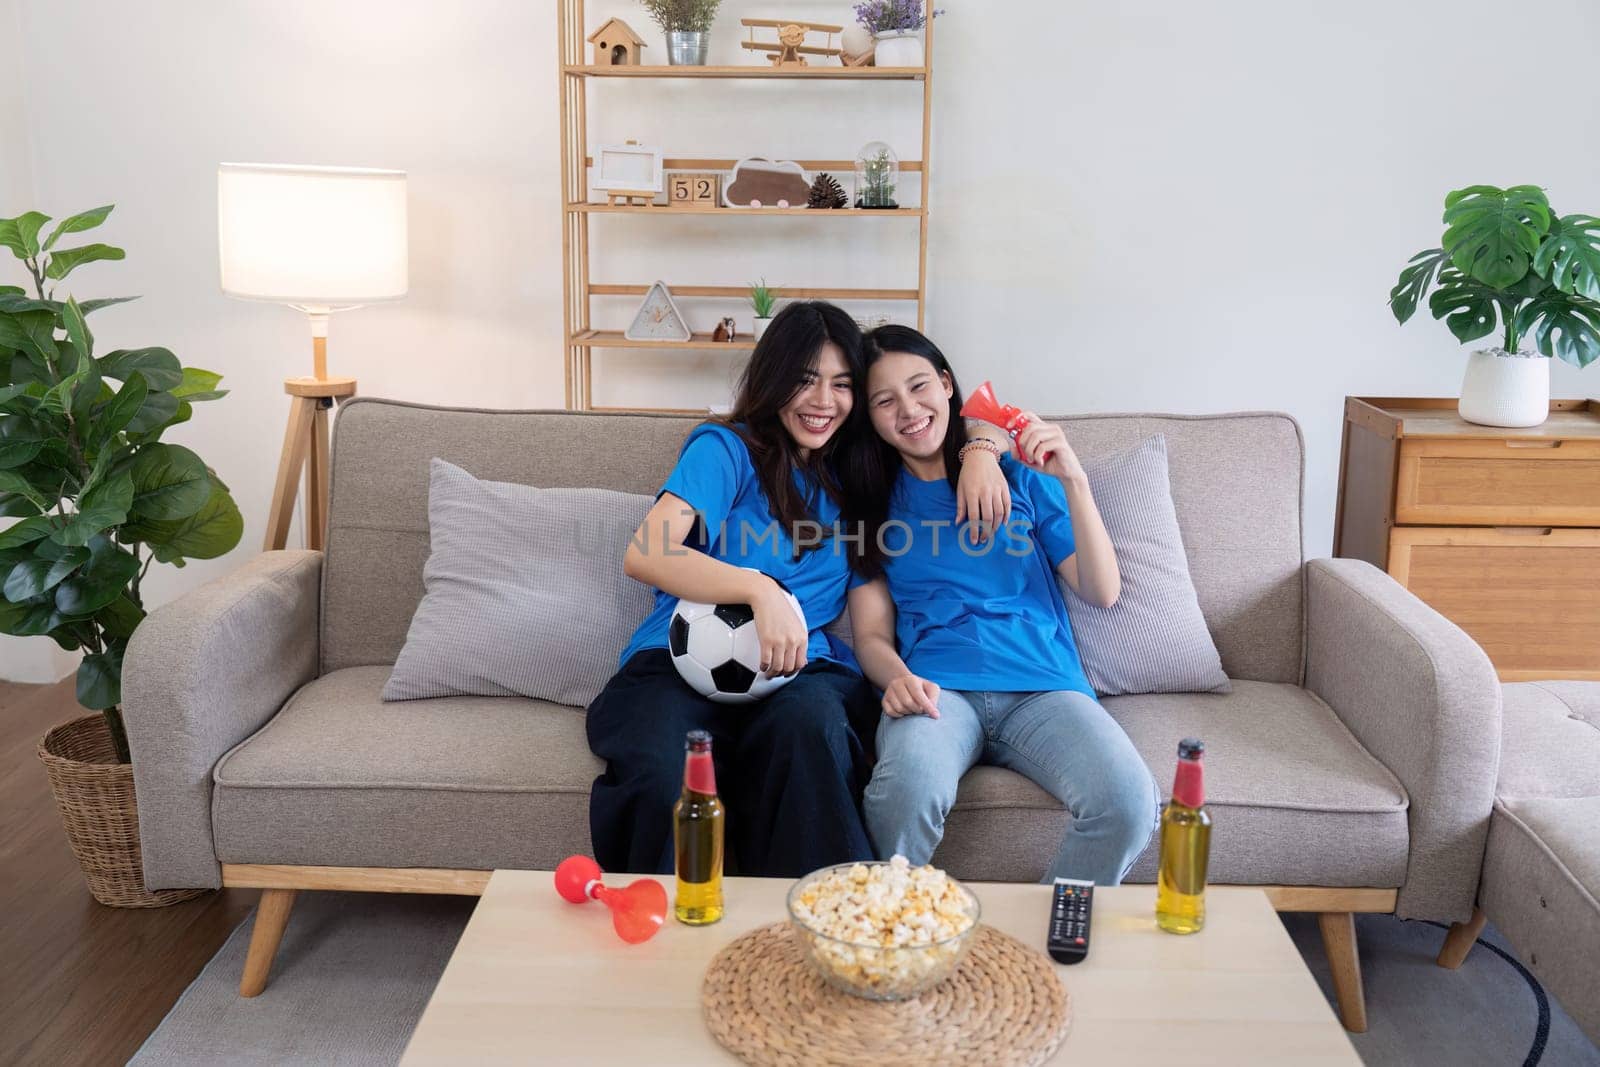 Lesbian couple cheering for Euro football match at home with drinks and popcorn. Concept of LGBTQ pride, sports enthusiasm, and celebration.